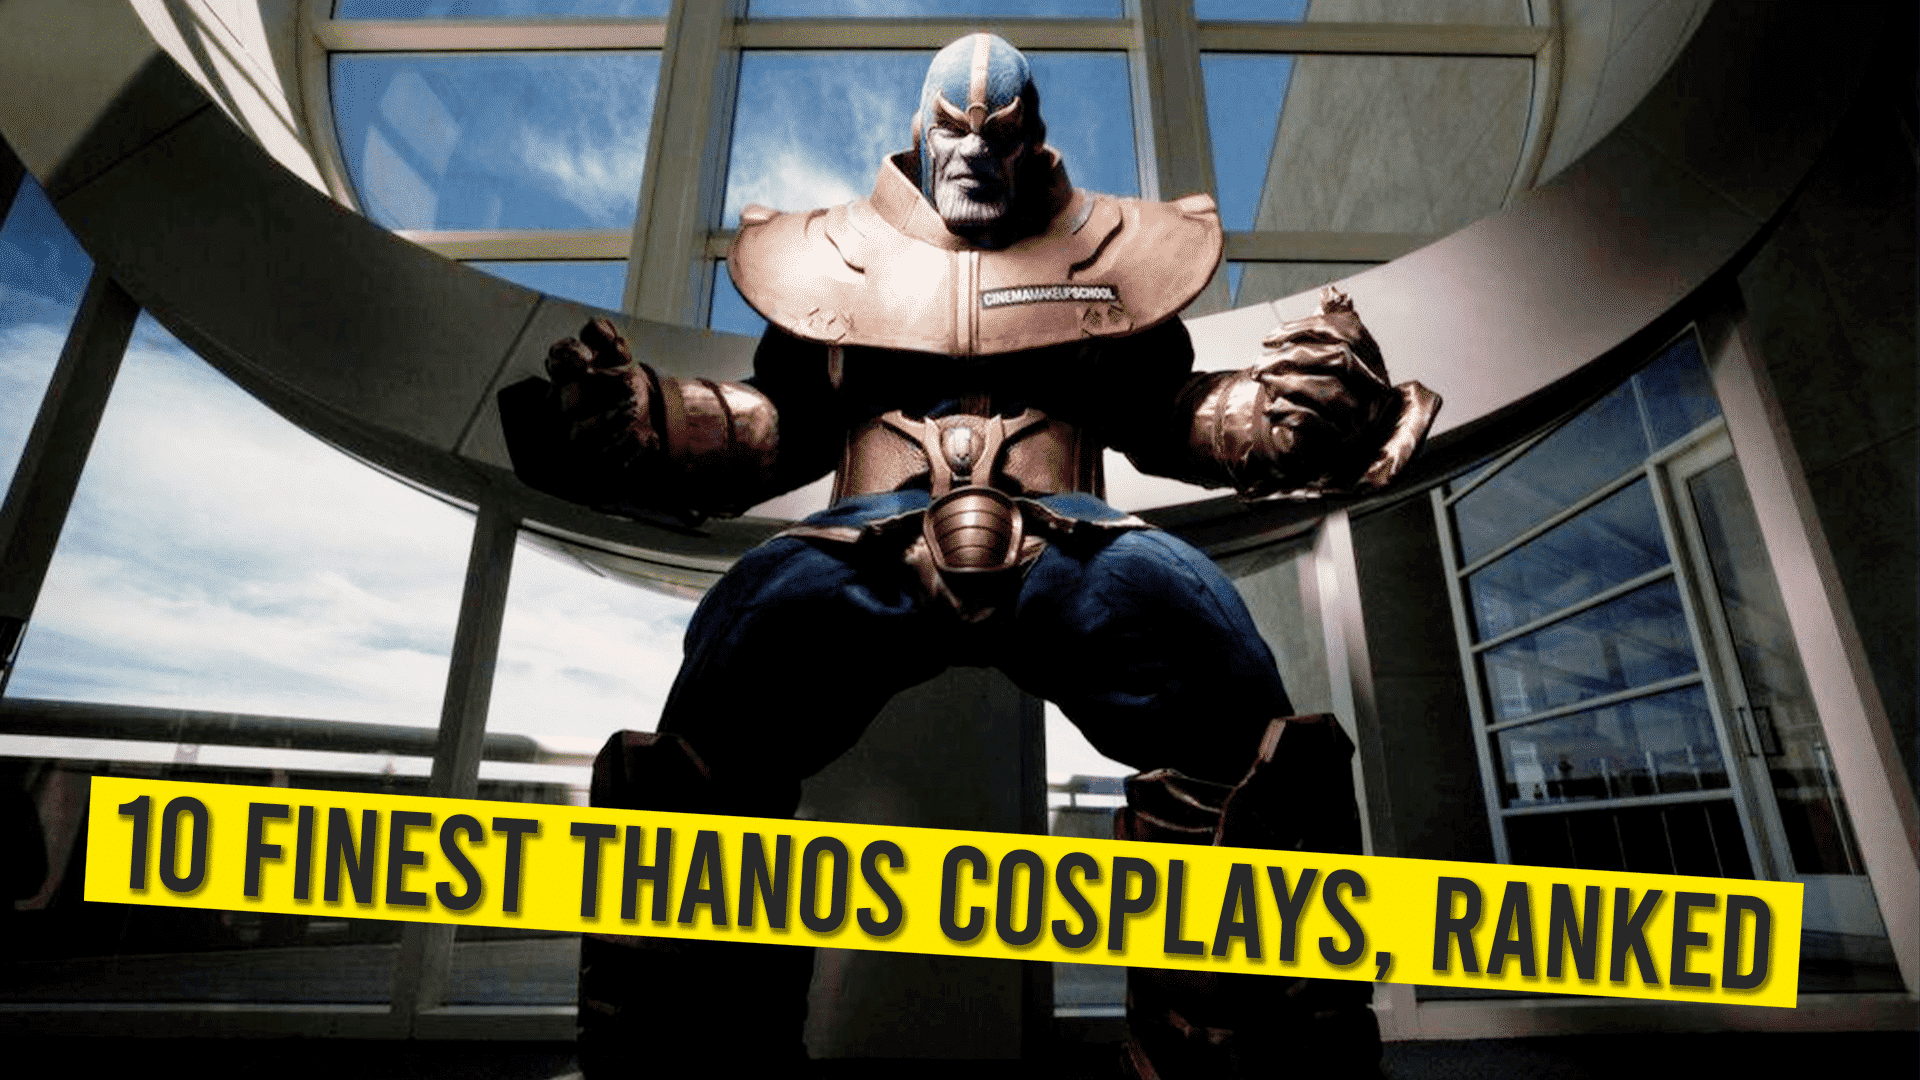 10 Finest Thanos Cosplays, Ranked